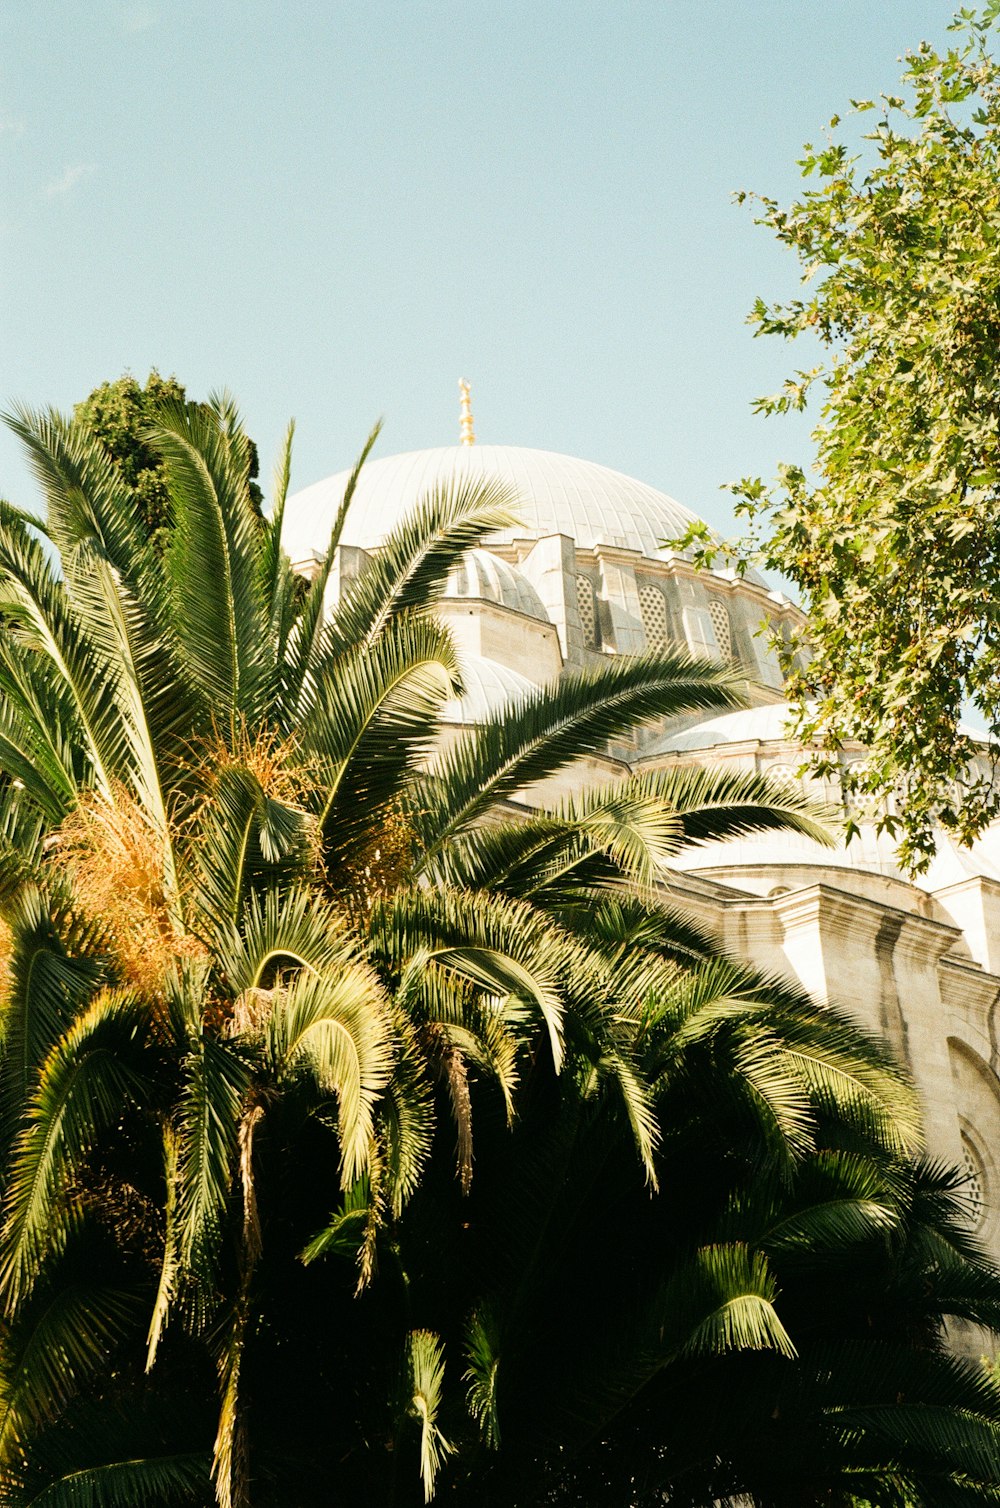 a palm tree in front of a building with a dome